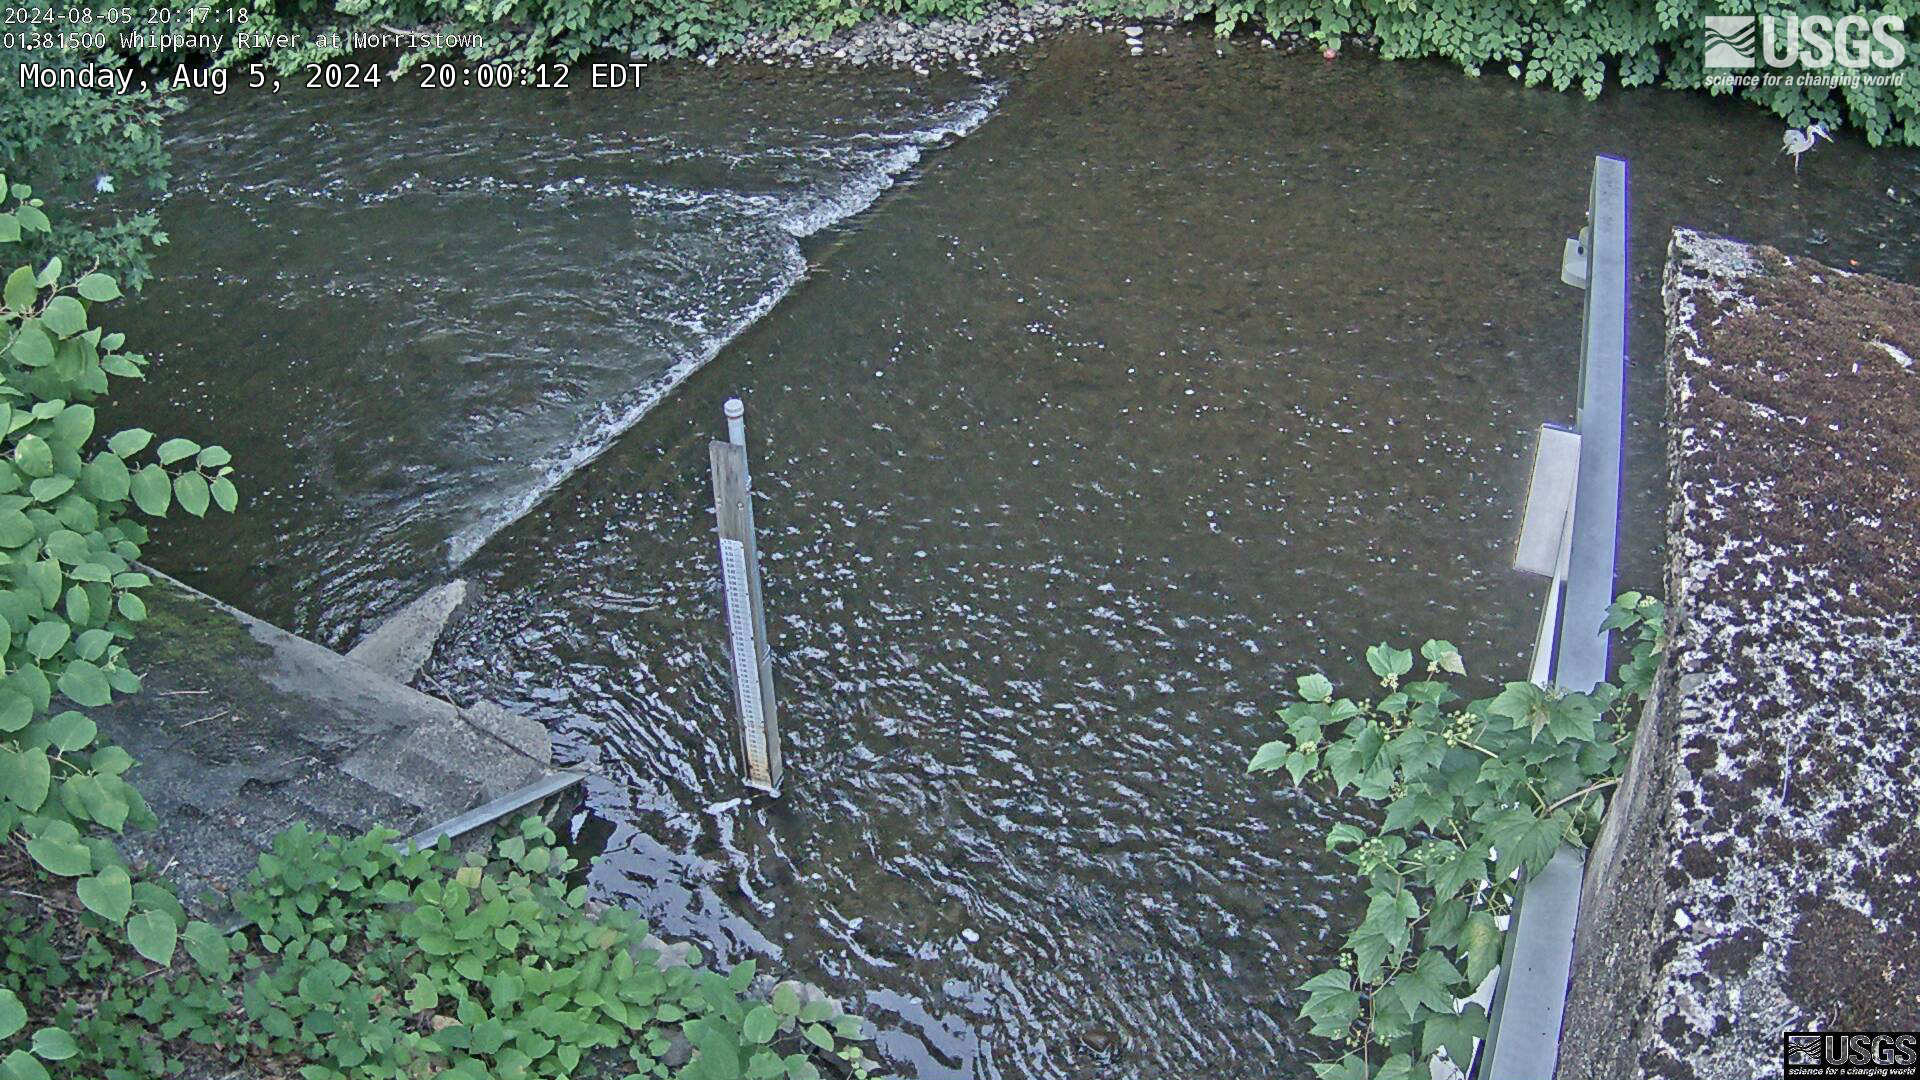 View of the Staff at the Whippany River measuring site